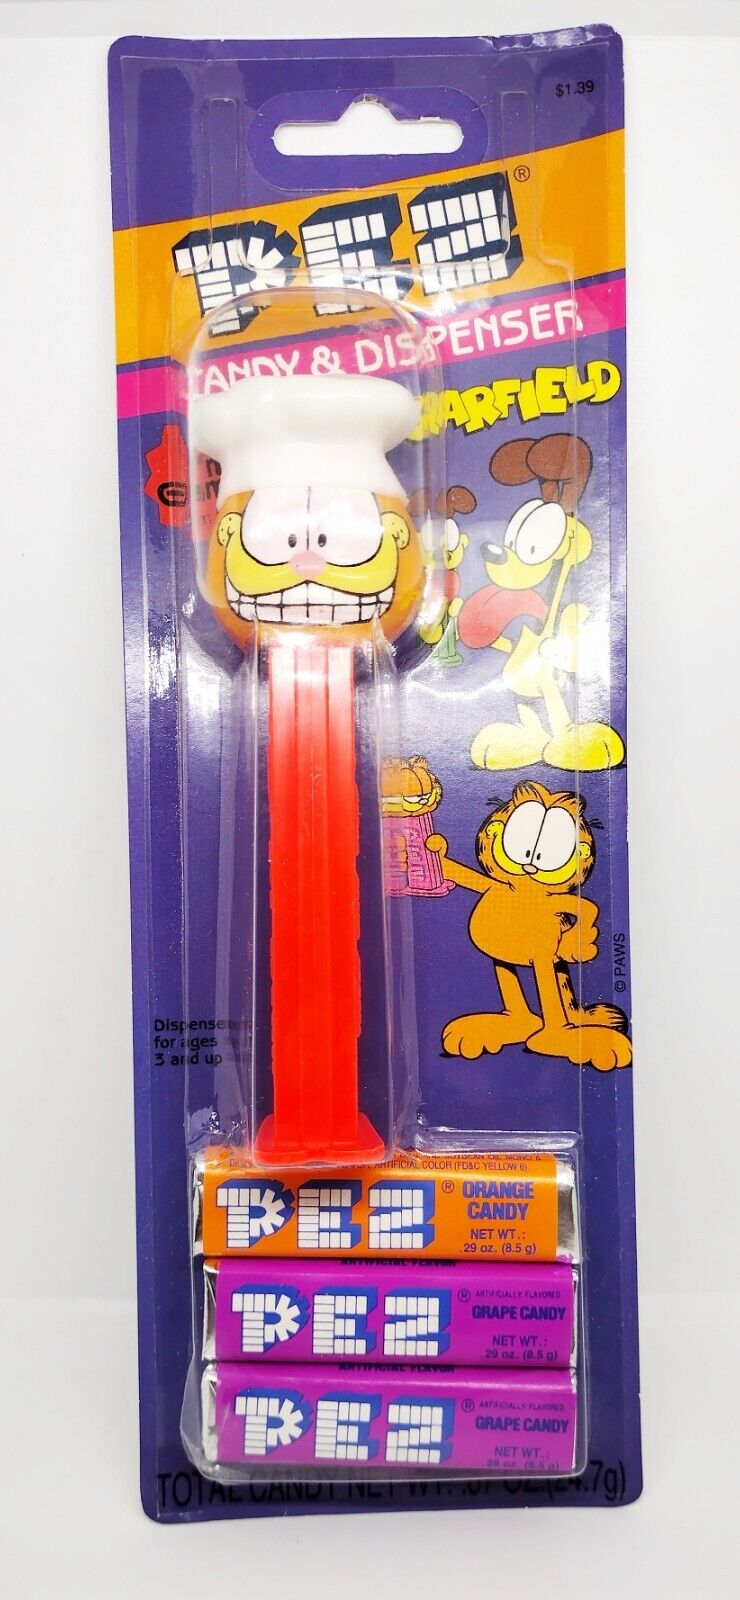 Garfield Chef Hat Footed Pez Candy & Dispenser Blister Pack